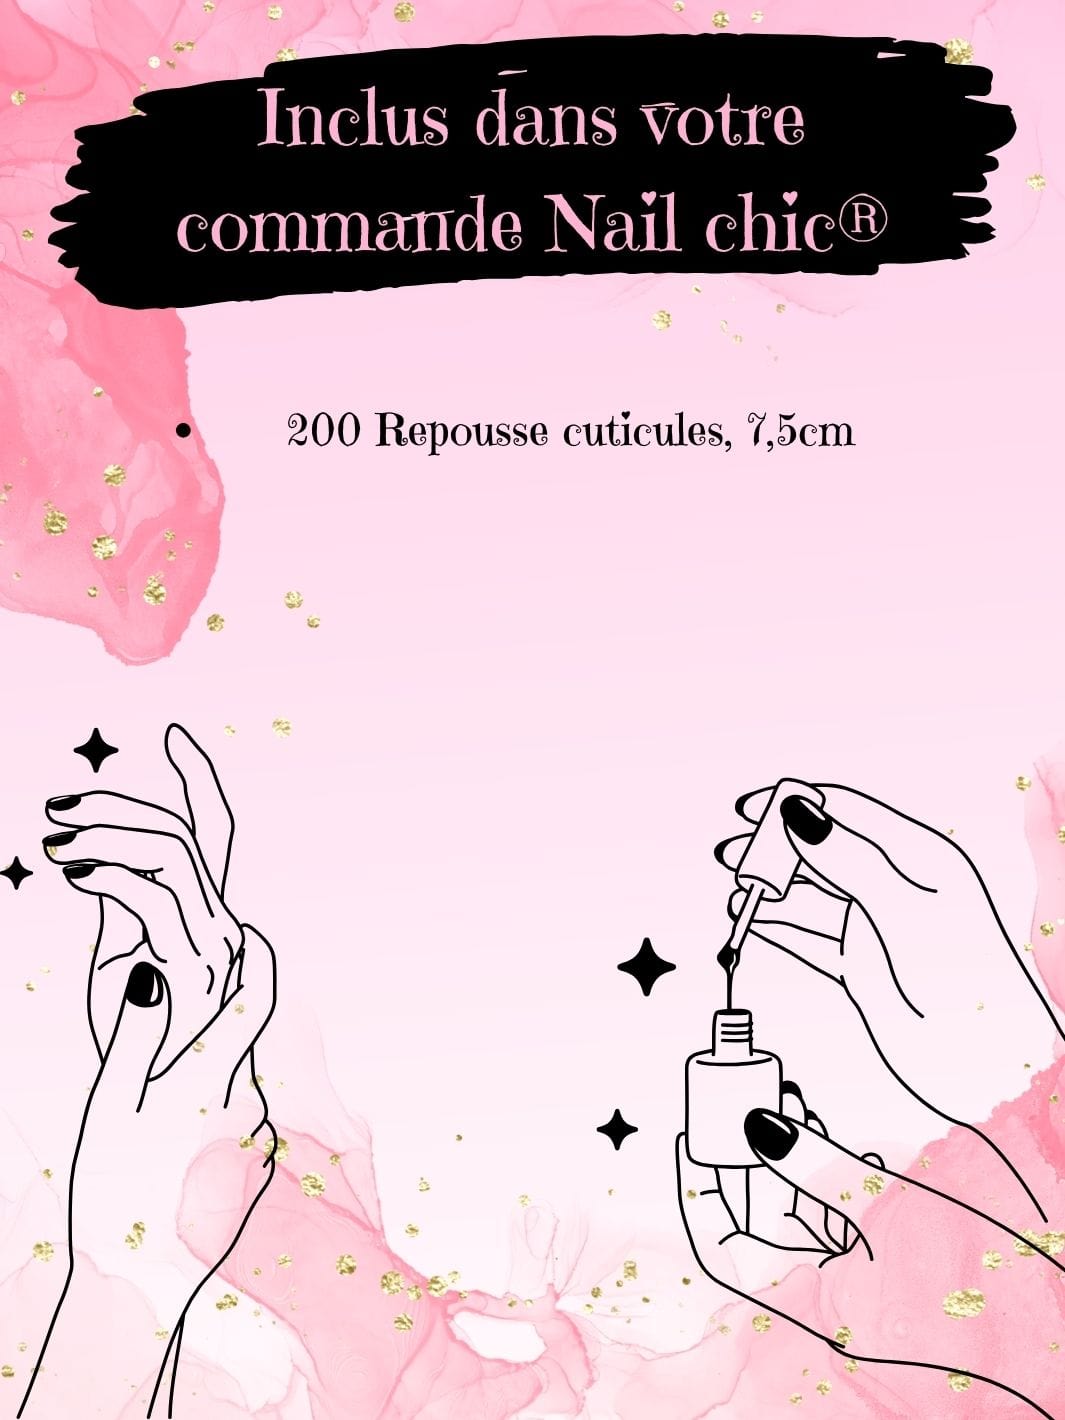 Repousse cuticules Nail Chic